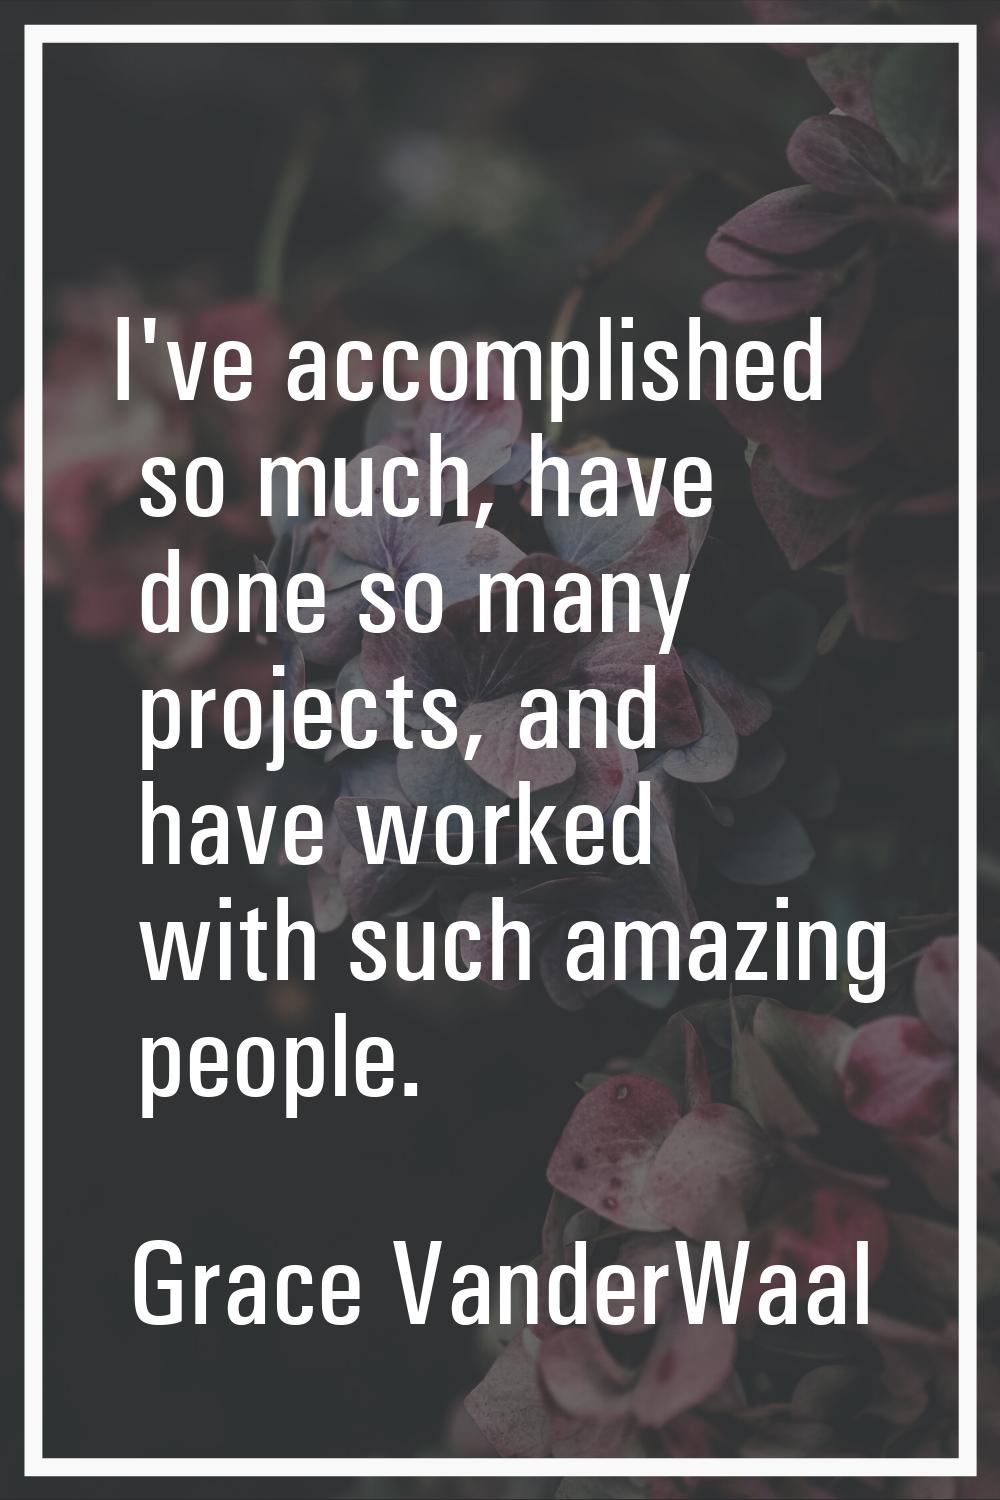 I've accomplished so much, have done so many projects, and have worked with such amazing people.